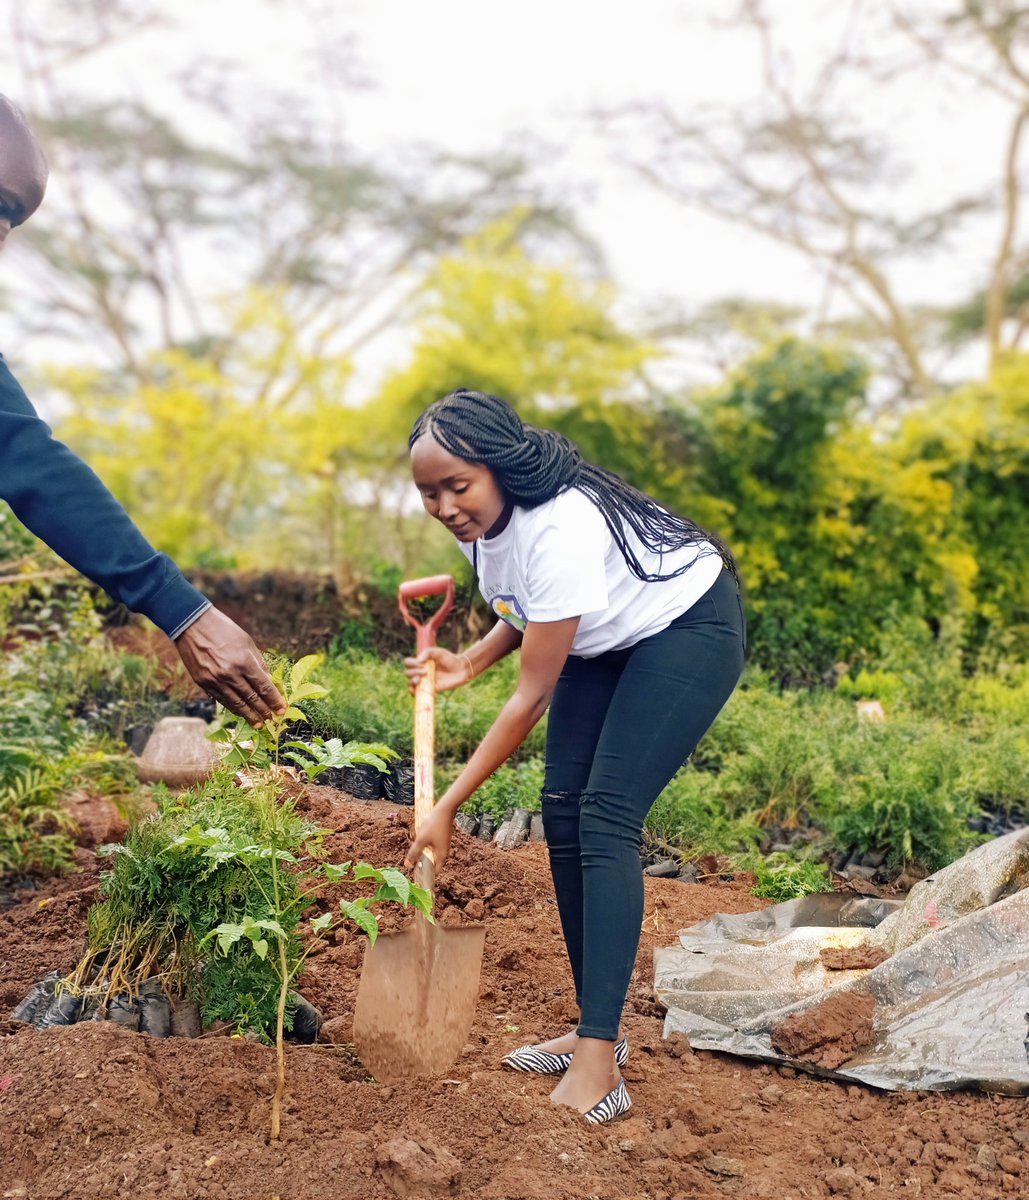 Today was a successful day we managed to plant 50 trees🌳🌳🌳.Let us make our country green.#Itstimefornature #GreenCareIntiative.#ClimateAction
@USAIDKenya @UNEP @USEmbassyKenya @environpeoplede @UNFCCCwebcast